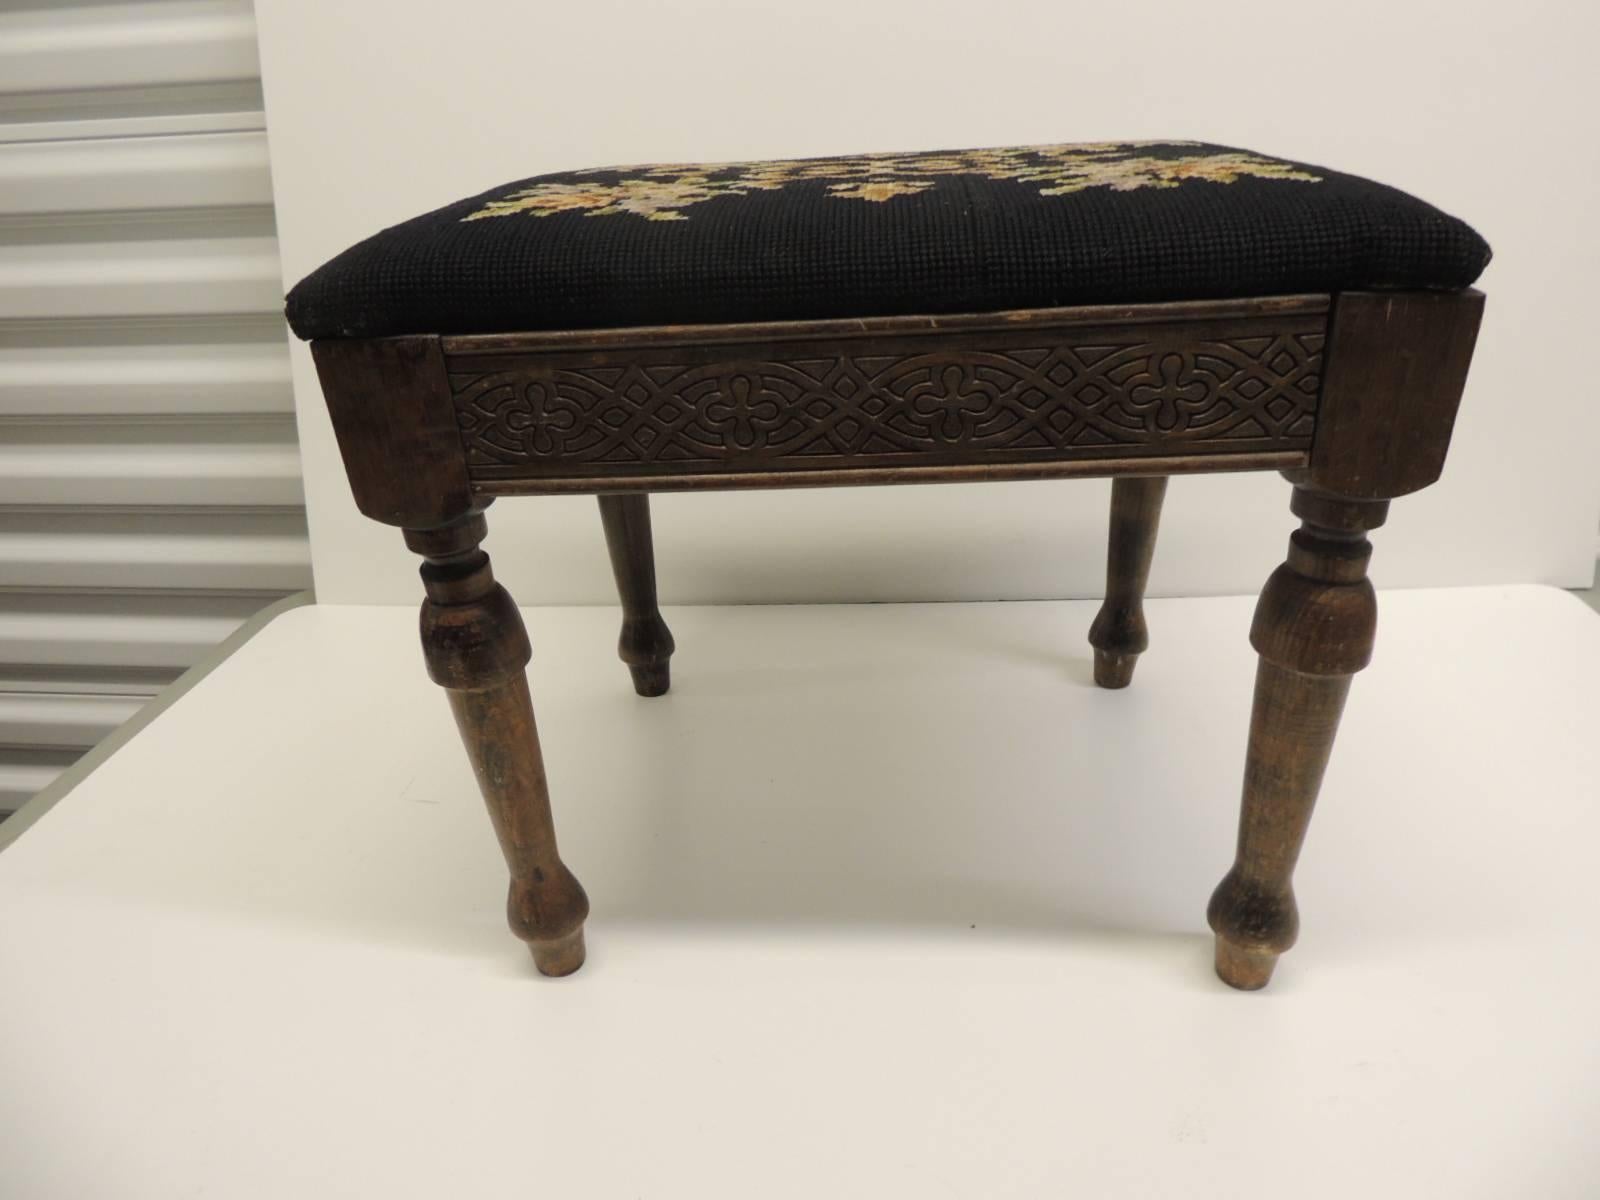 Vintage Gothic Style Footstool Reupholstered with Floral Tapestry Louis XVI Style Legs
Footstool with Louis XVI style fluted legs and reupholstered with a floral black antique tapestry with flowers; carvings all around the stretcher.  The flowers